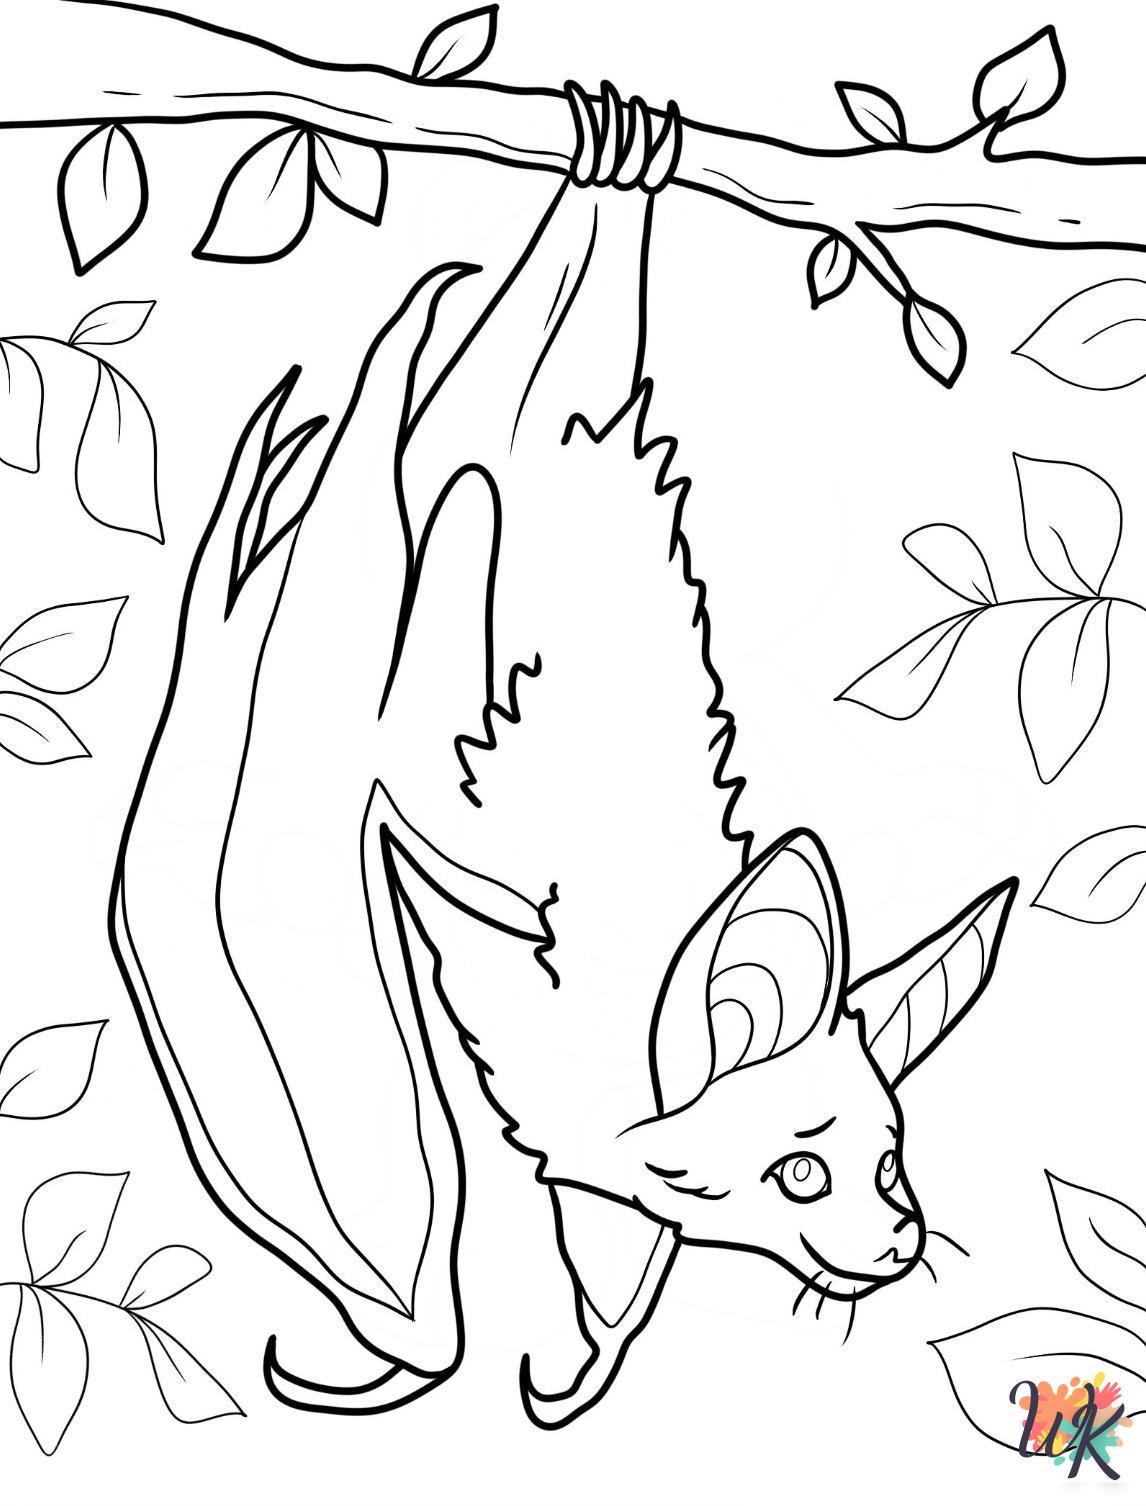 free Bat tree coloring pages 1